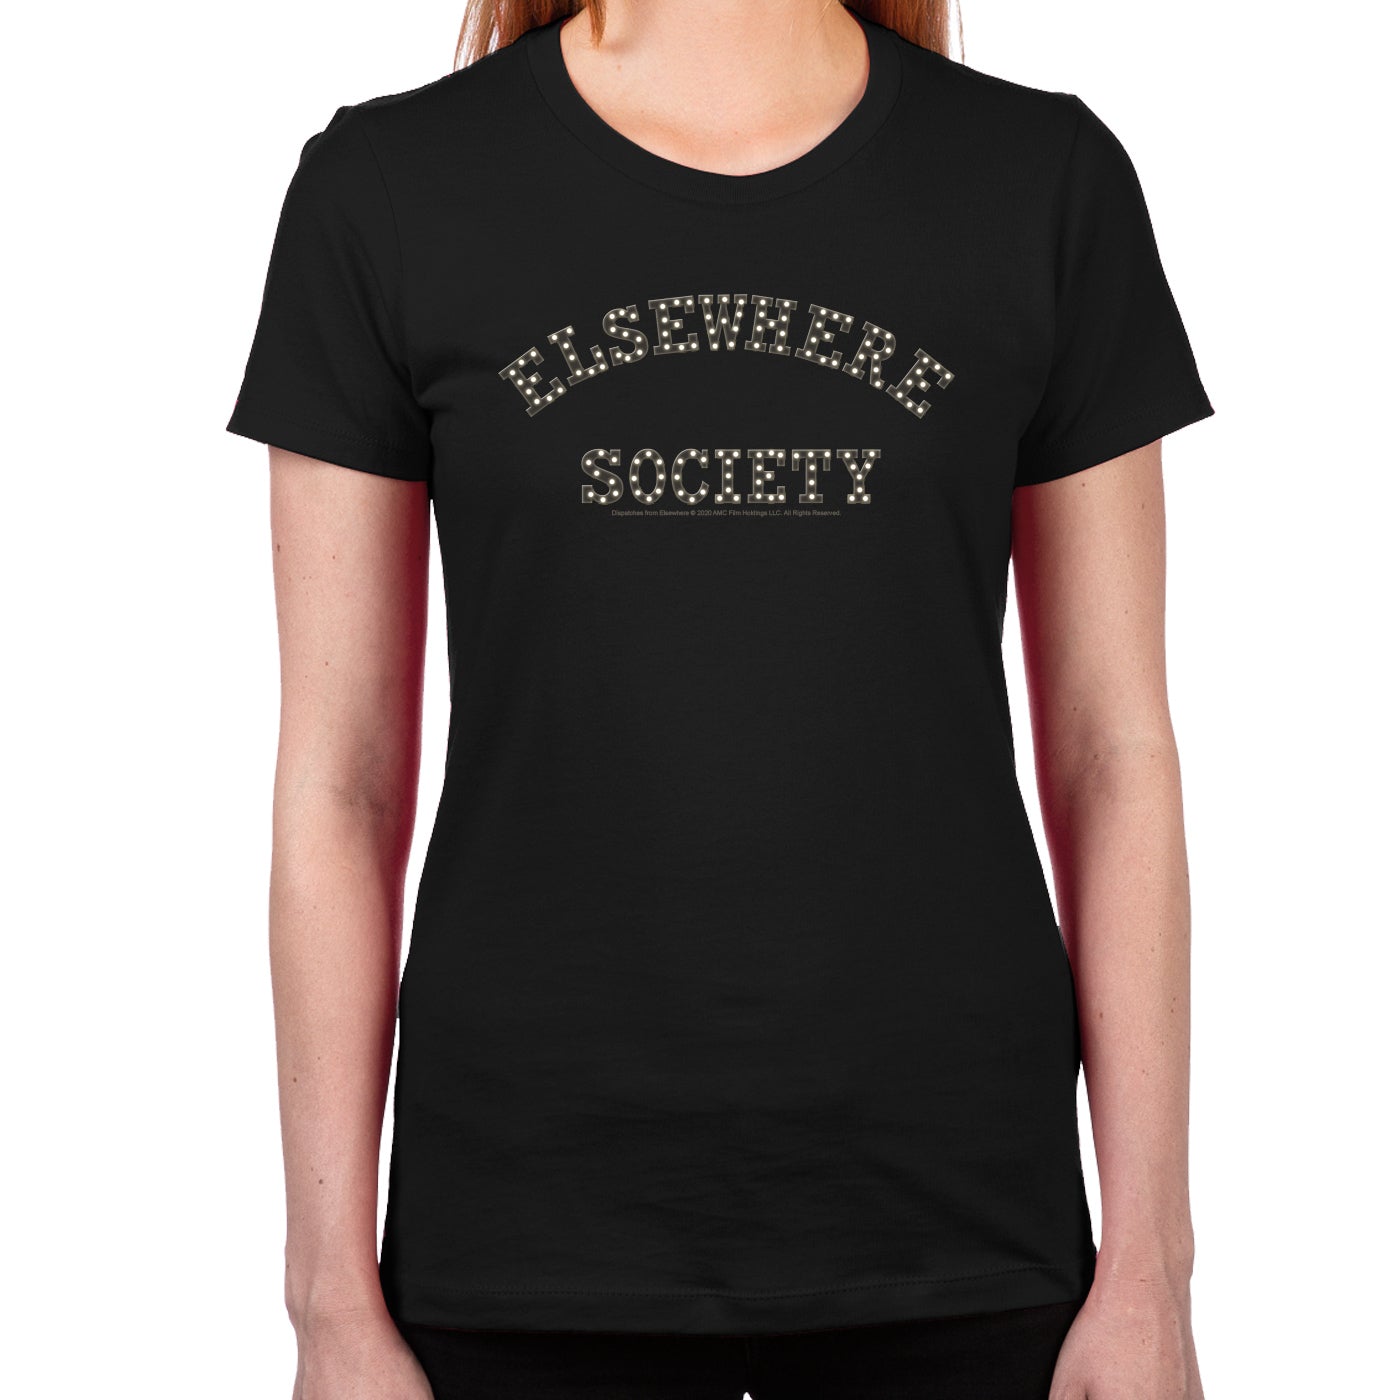 Dispatches From Elsewhere Elsewhere Society Women's T-Shirt